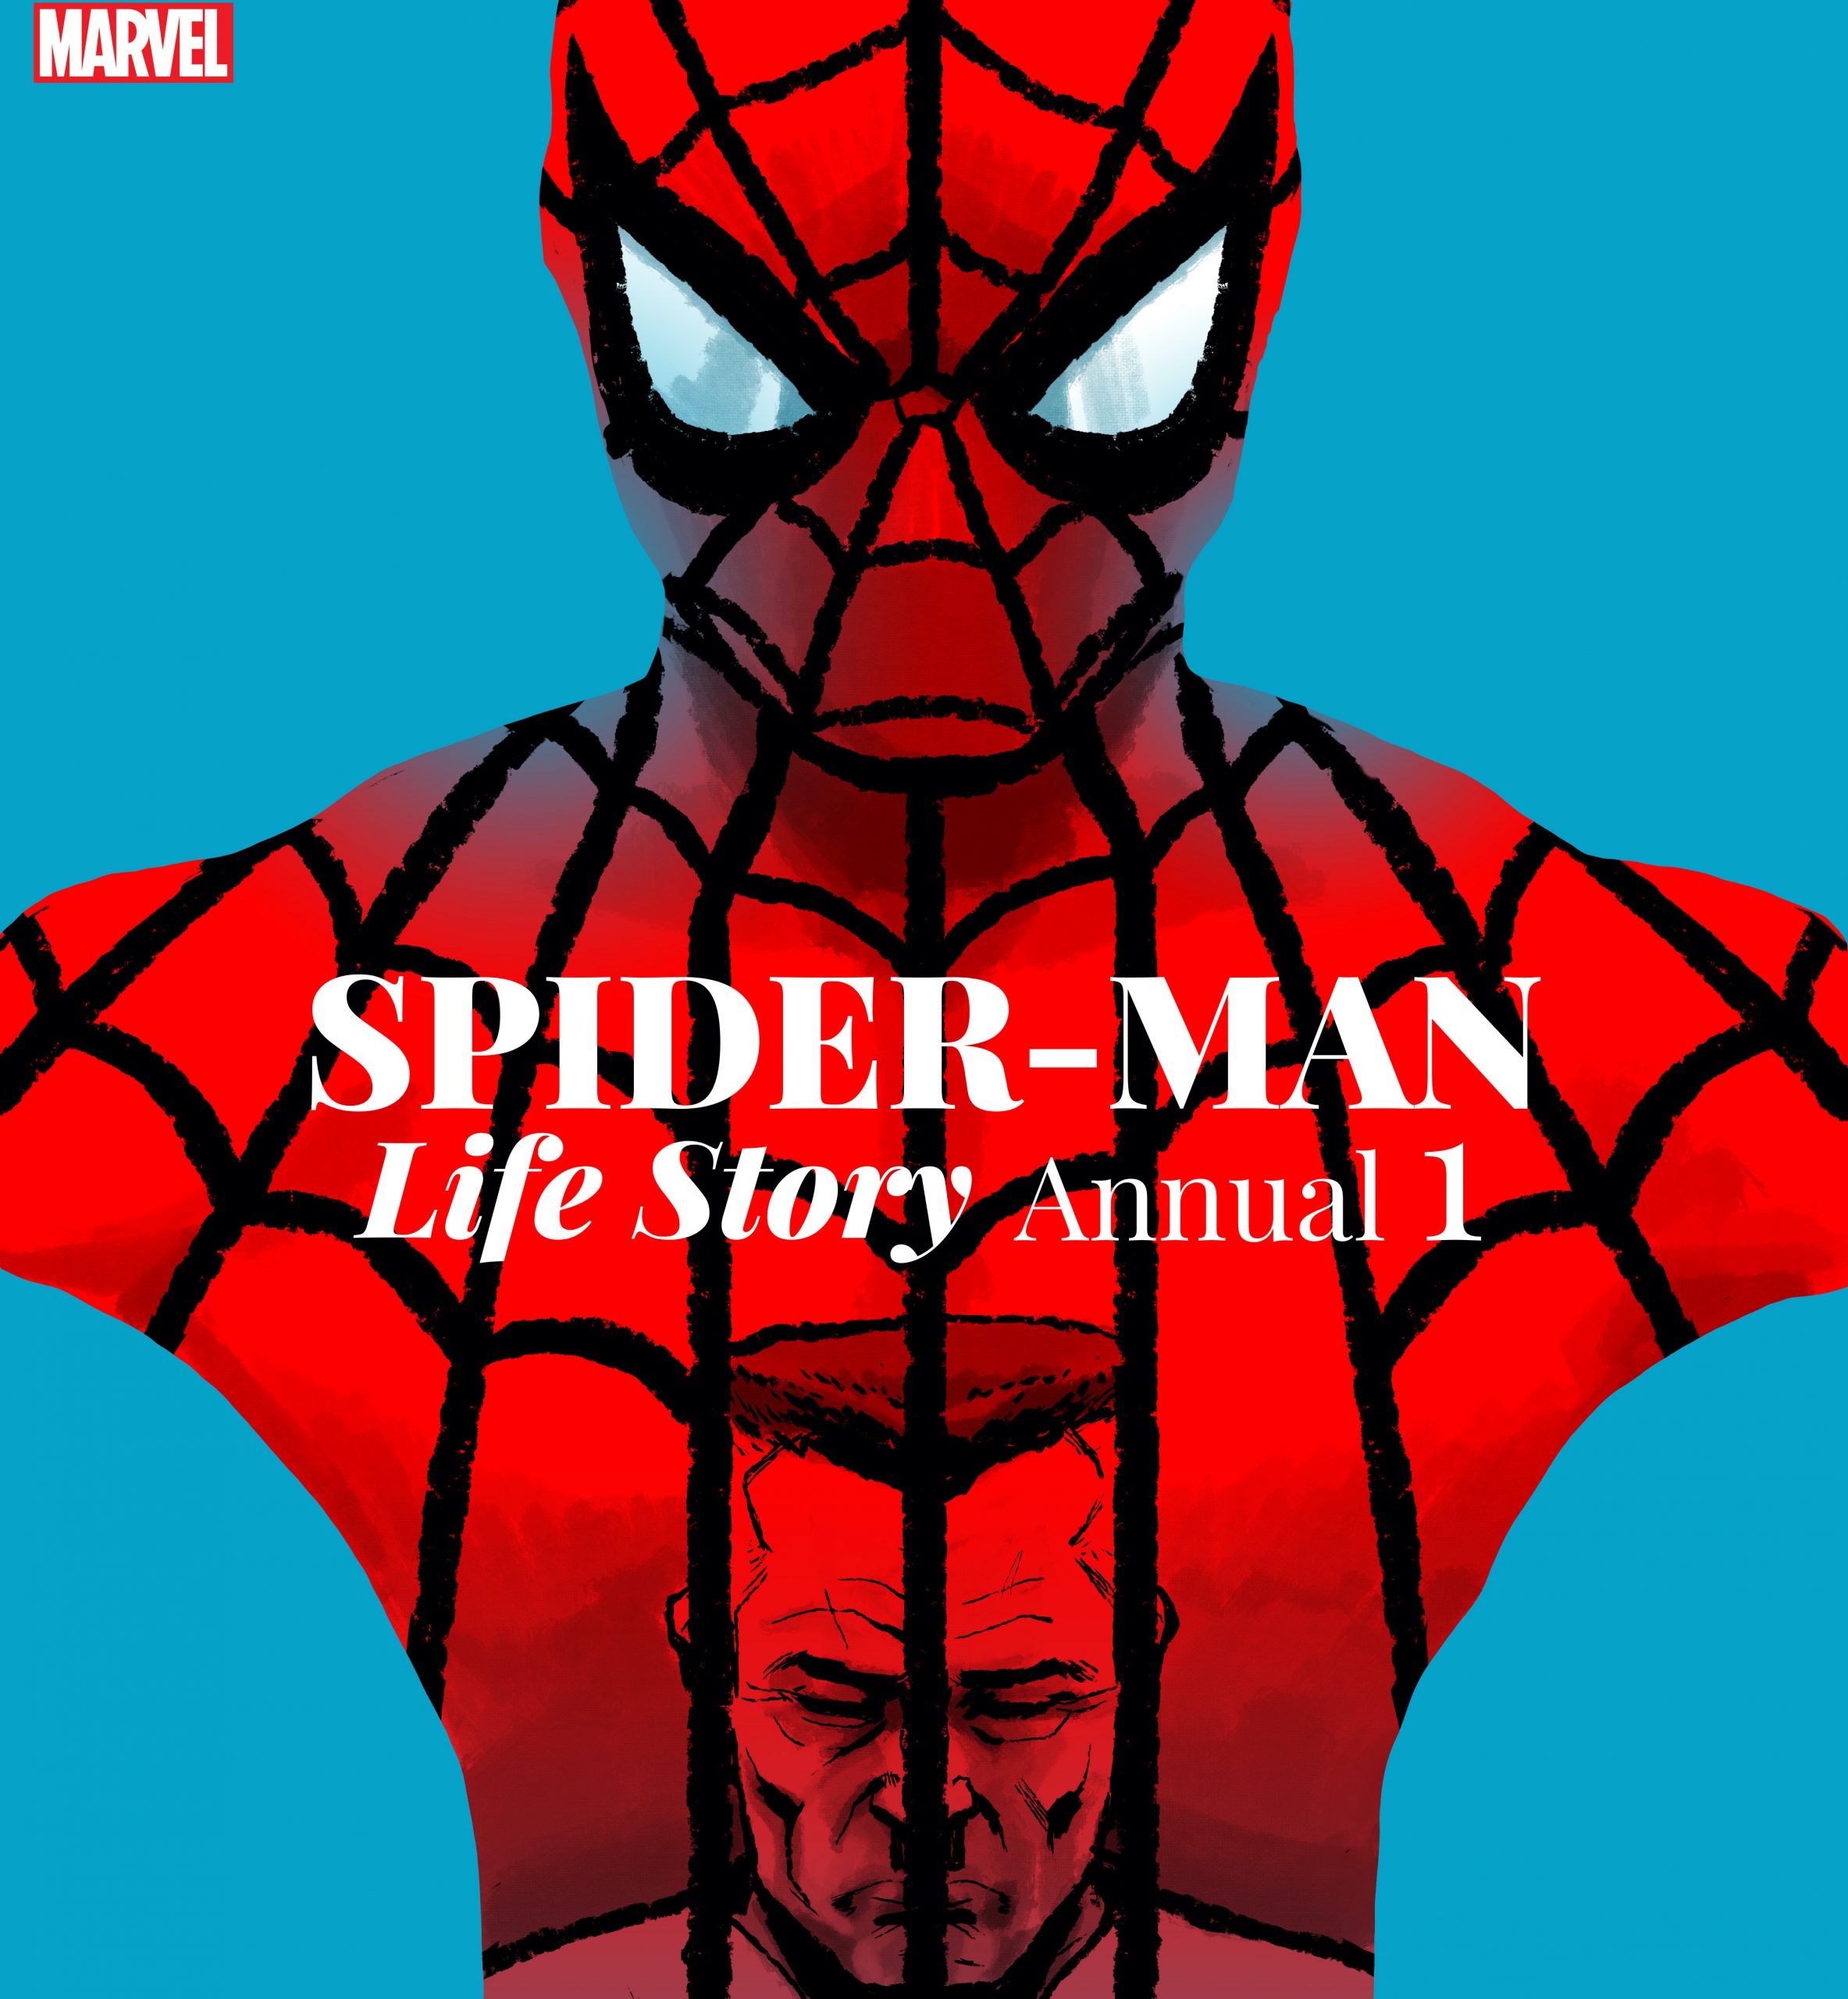 Chip Zdarsky and Mark Bagley join forces on 'Spider-Man: Life Story Annual' #1